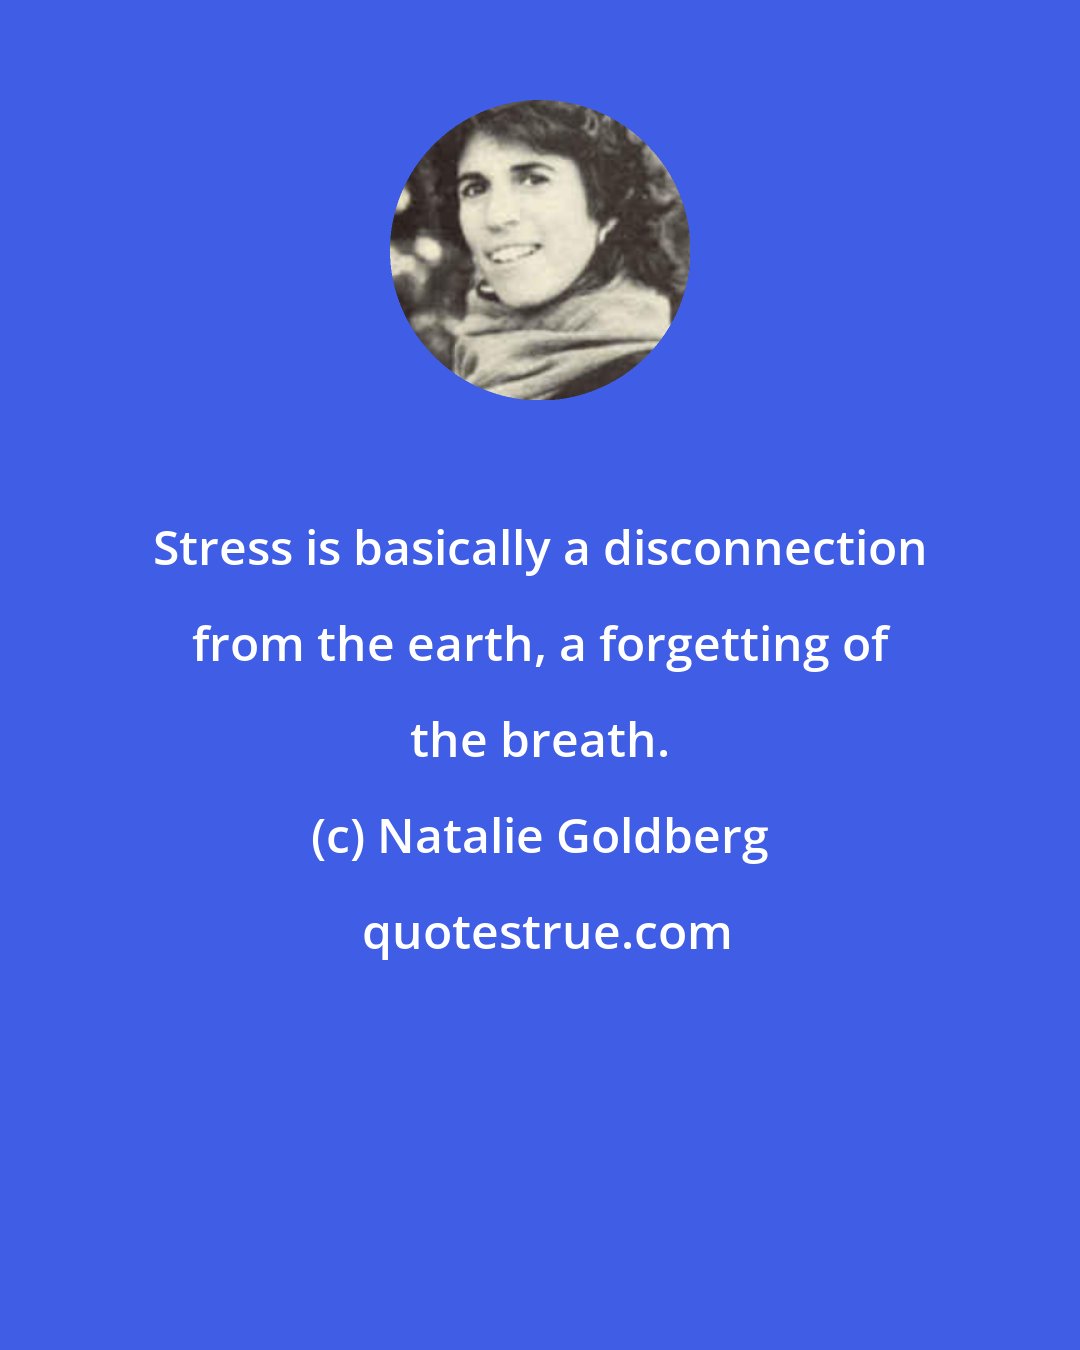 Natalie Goldberg: Stress is basically a disconnection from the earth, a forgetting of the breath.